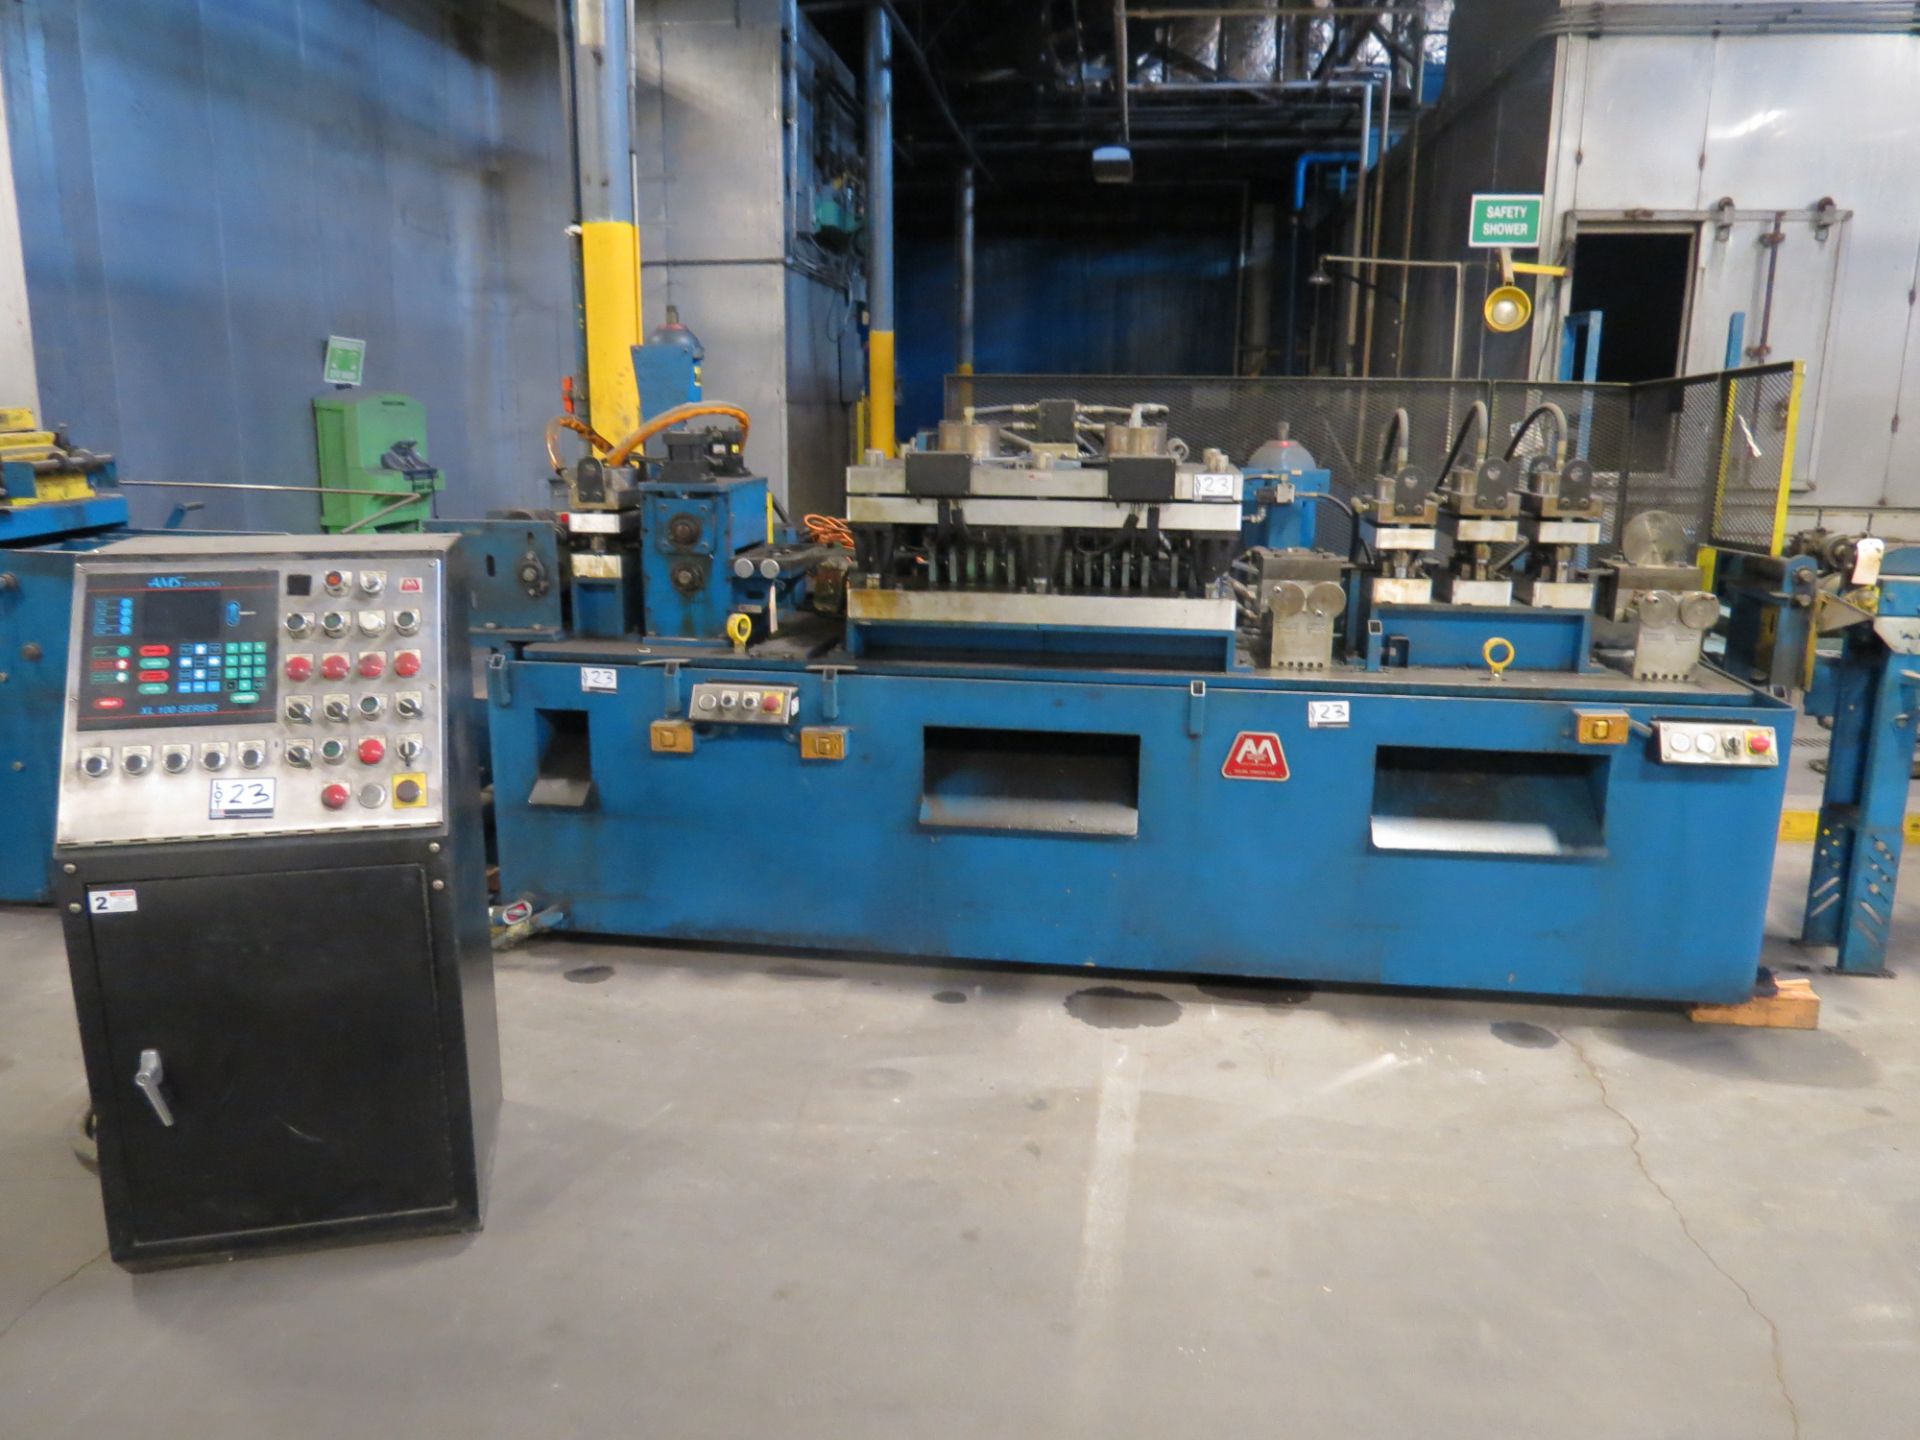 AMS Material Straightener with hyd shear & punches, XL 100 Controls